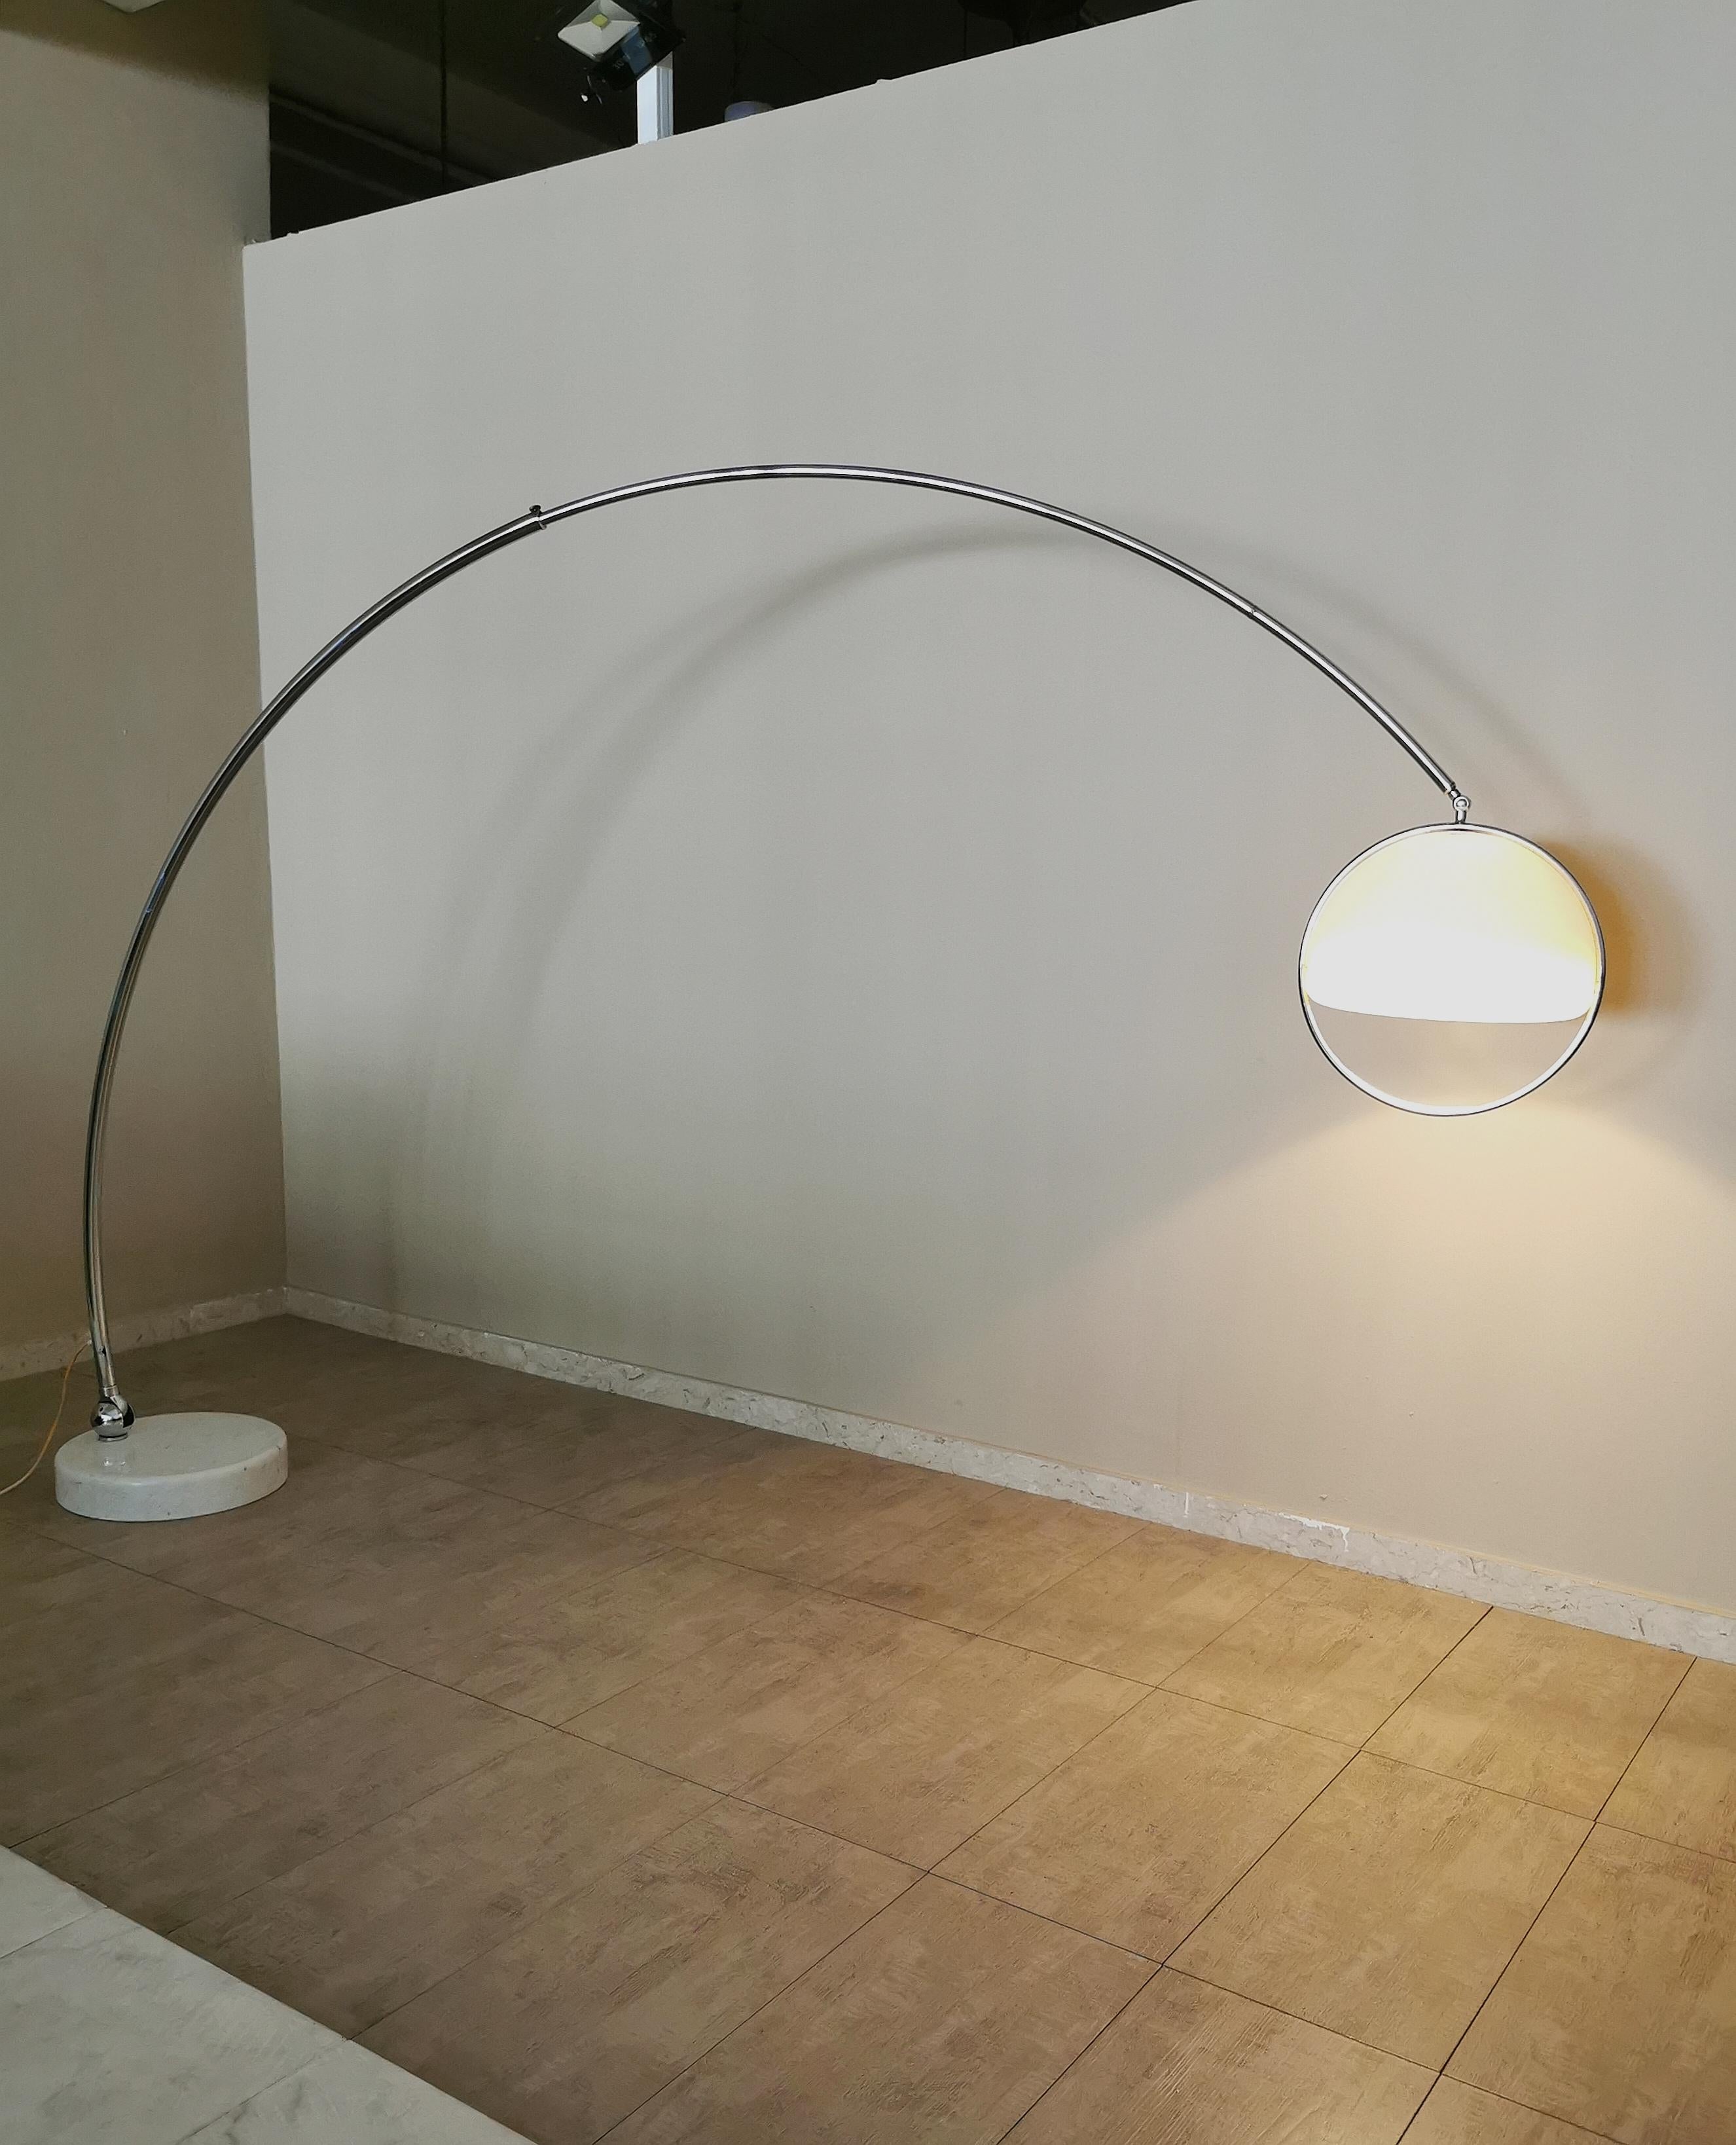  Rare and large-sized arc floor lamp designed by the Italian designer Goffredo Reggiani. The lamp has a round base in white marble, with a hole for housing the swivel and extendable chromed metal rod. It ends with a 1-light E27 diffuser in